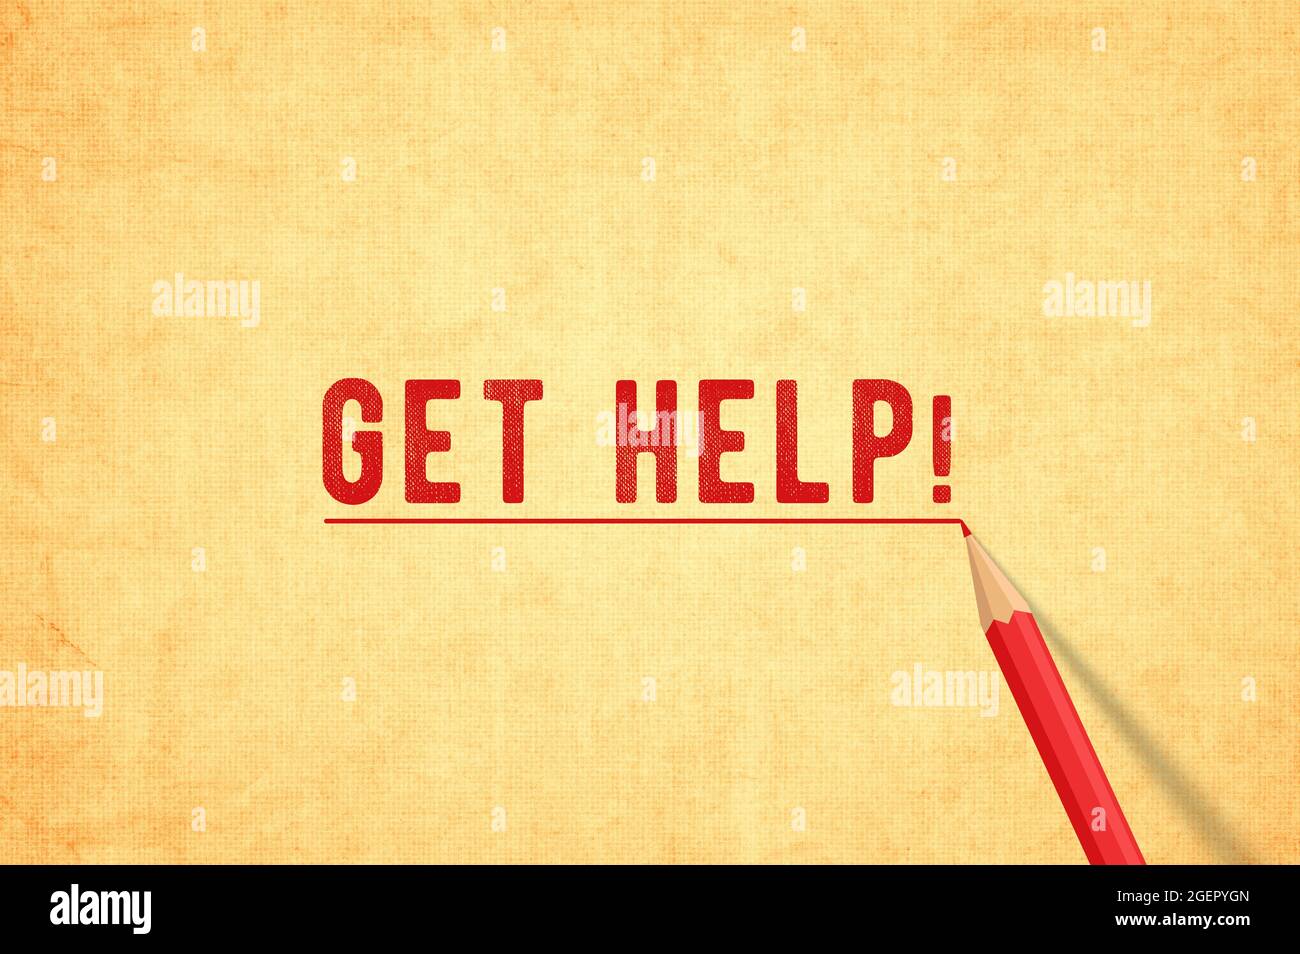 Get Help! Message Written in grungy Texture Yellow paper. Red pencil underline. Stock Photo